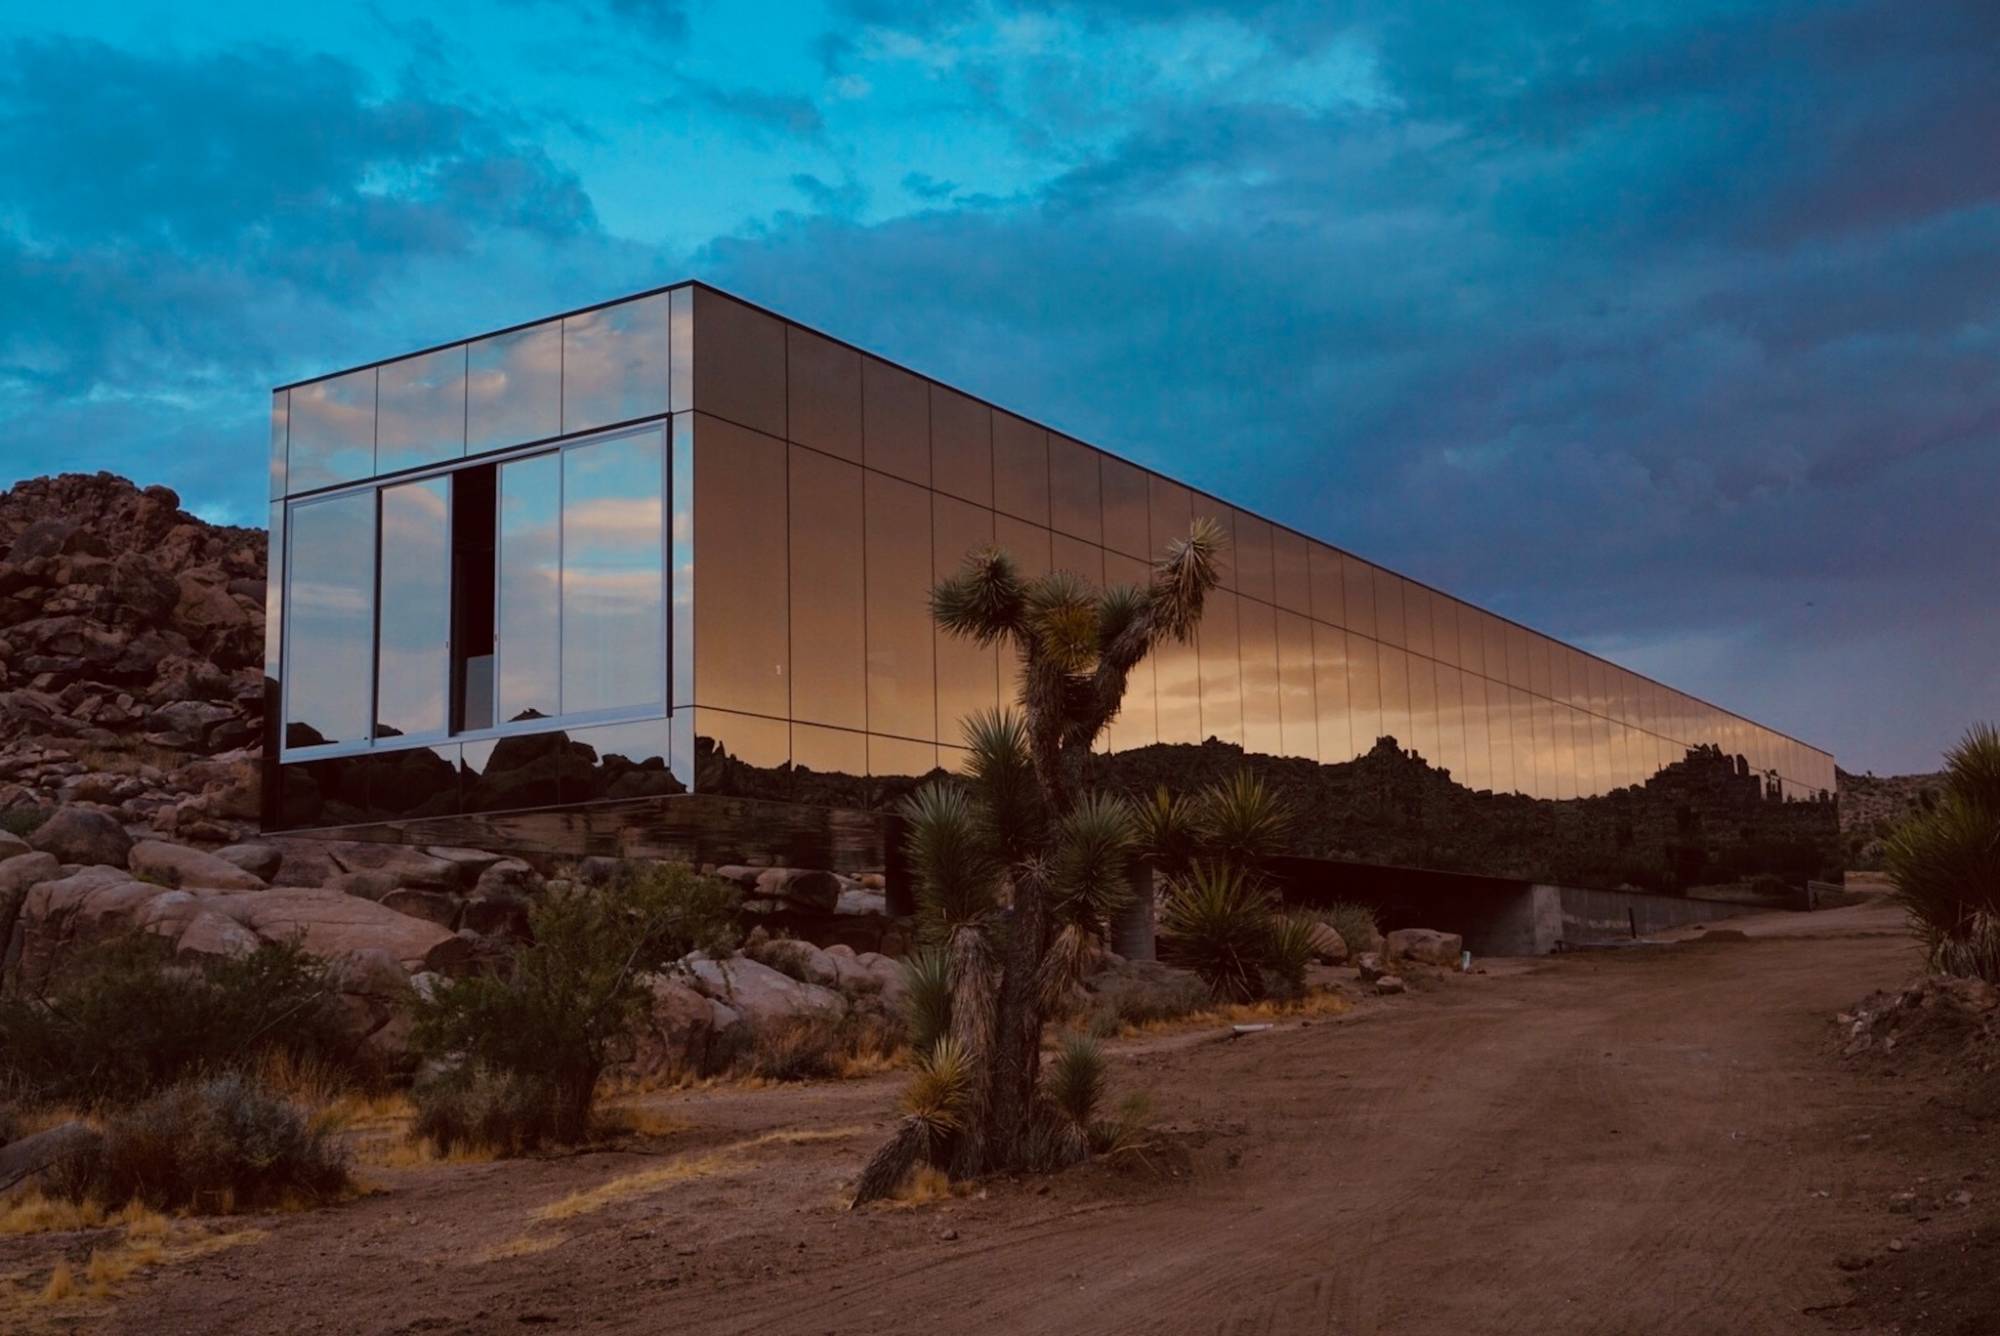 Take A Peek Inside The Invisible House In Joshua Tree